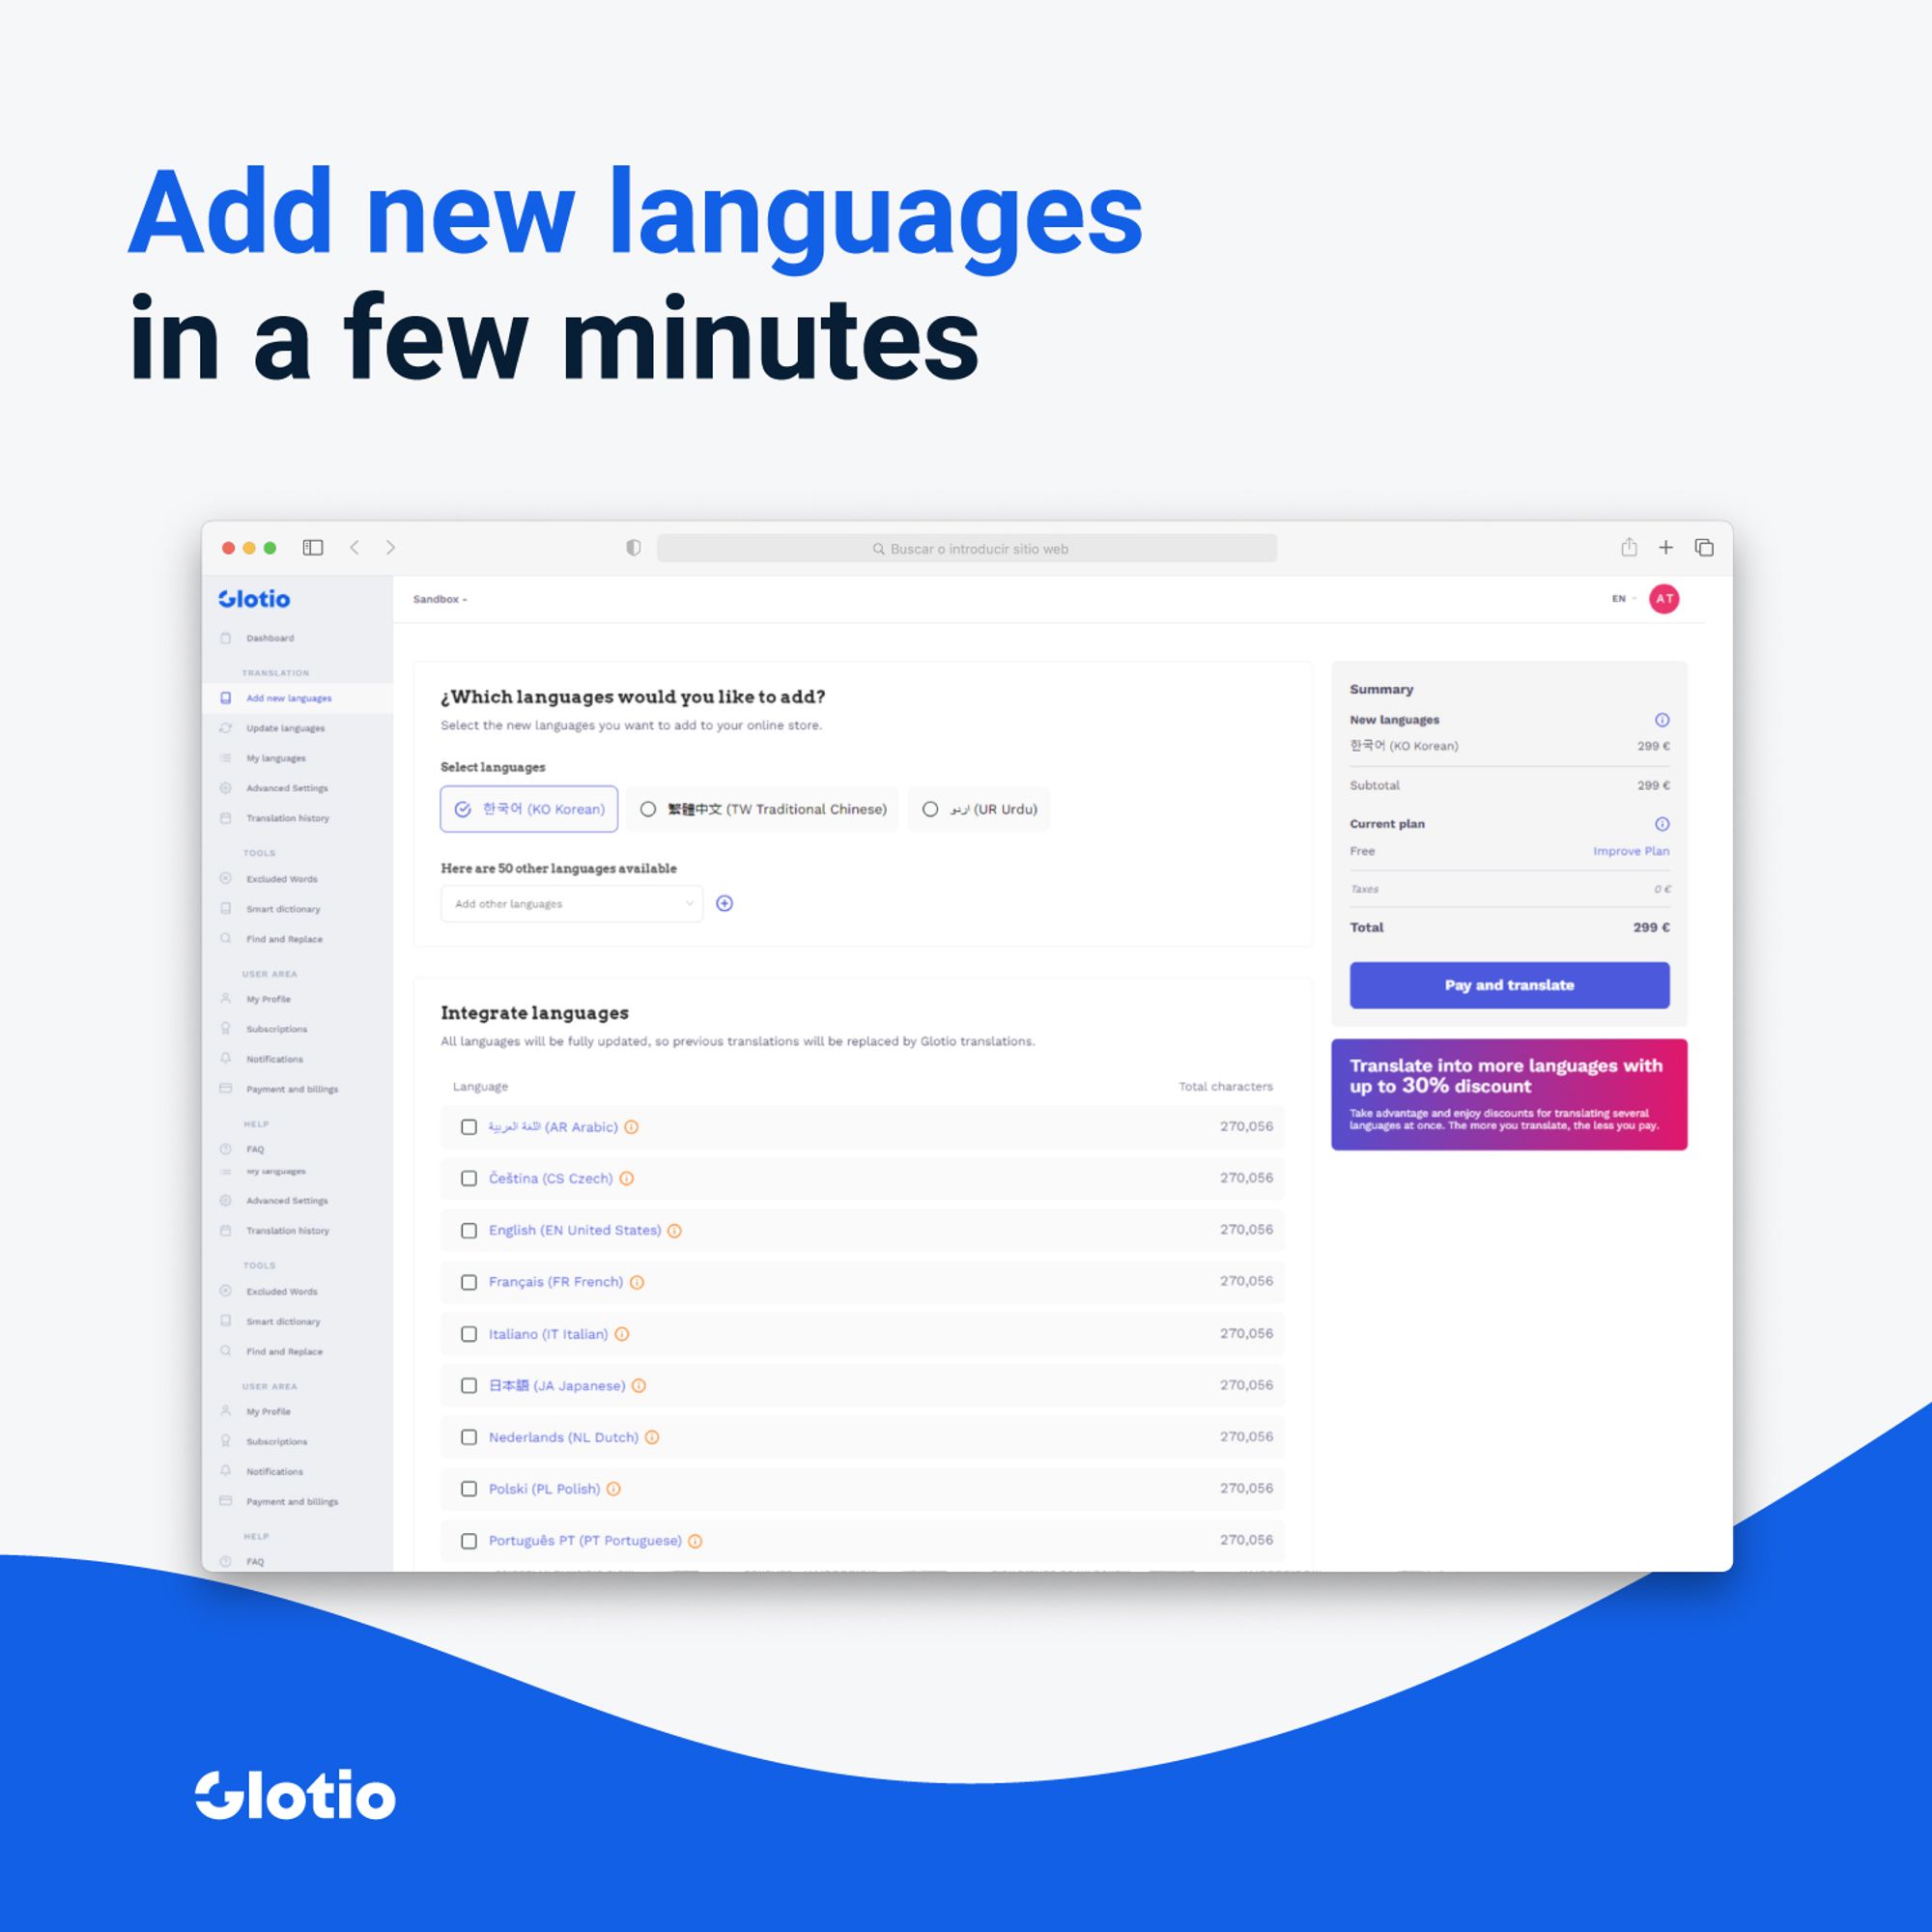 Select the language you want. Start translating from the source language in PrestaShop